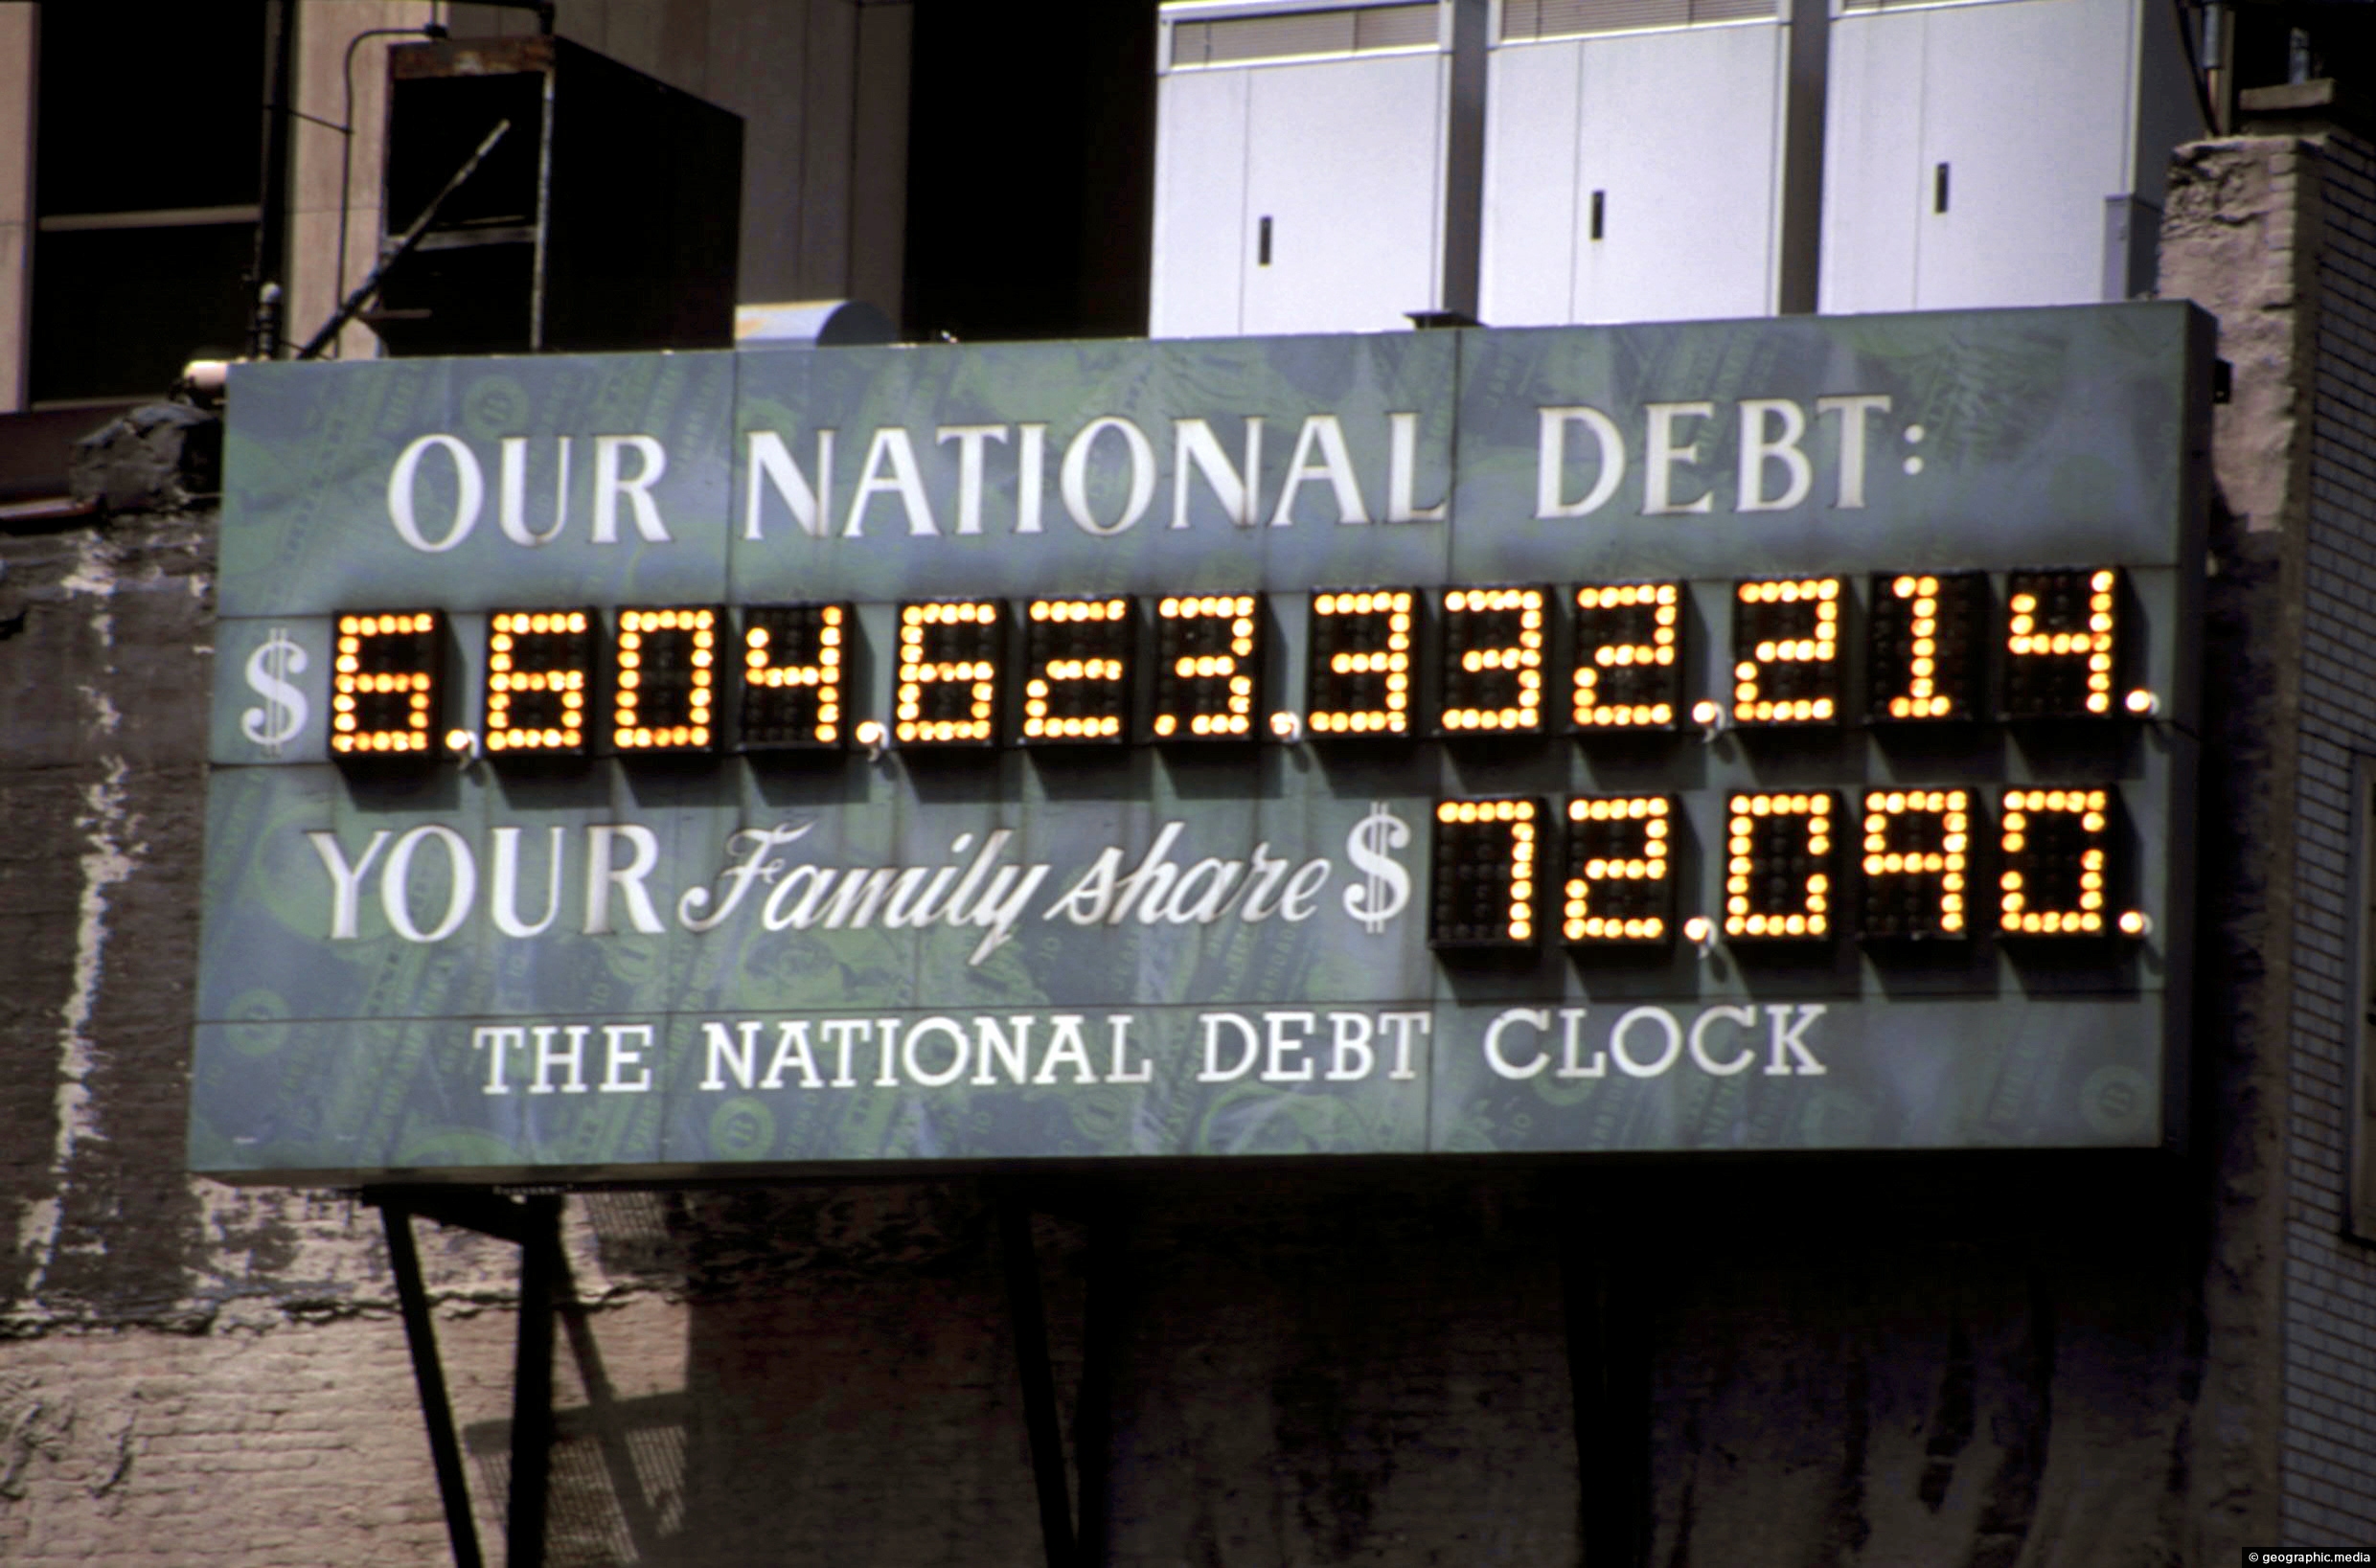 The National Debt Clock in New York